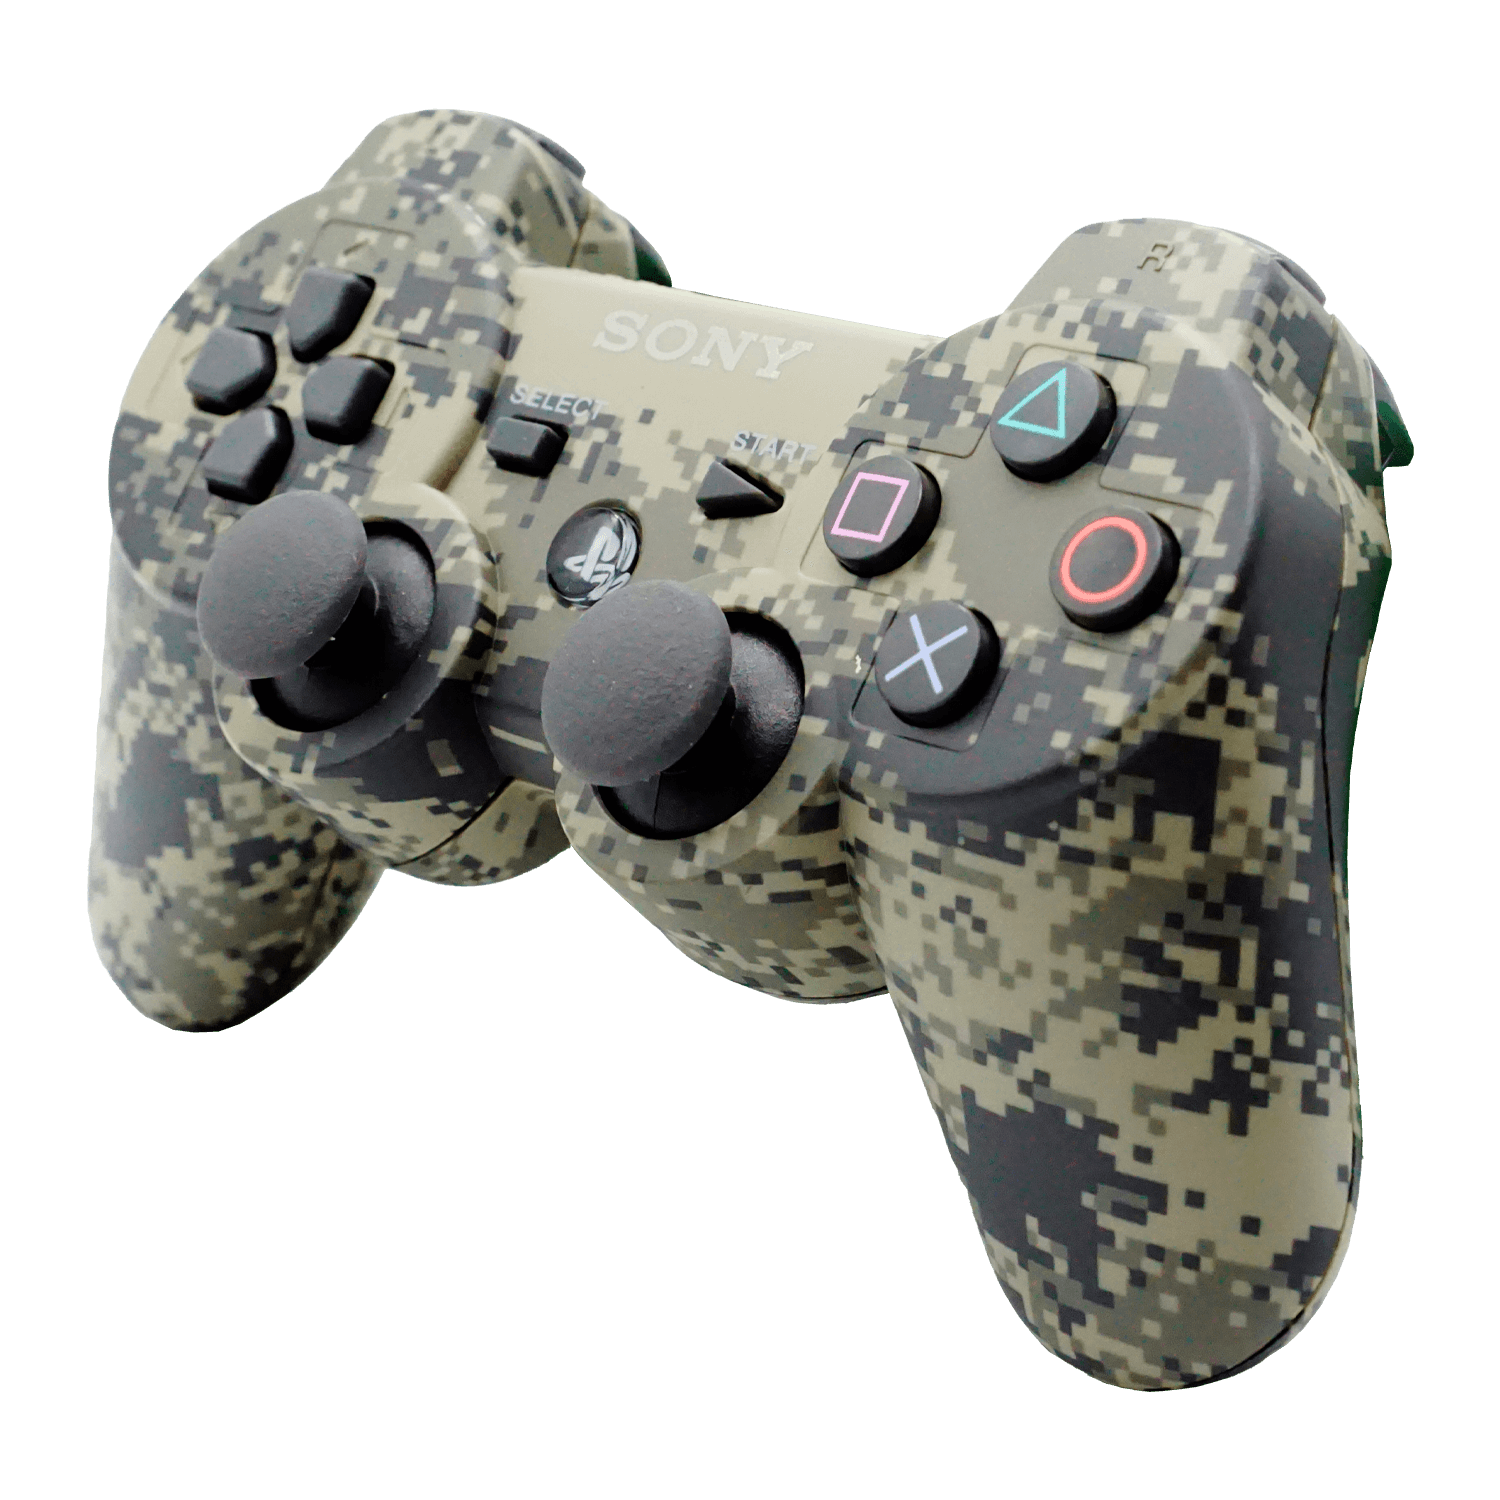 Controle PS3 Dualshock PPP - Army Brown